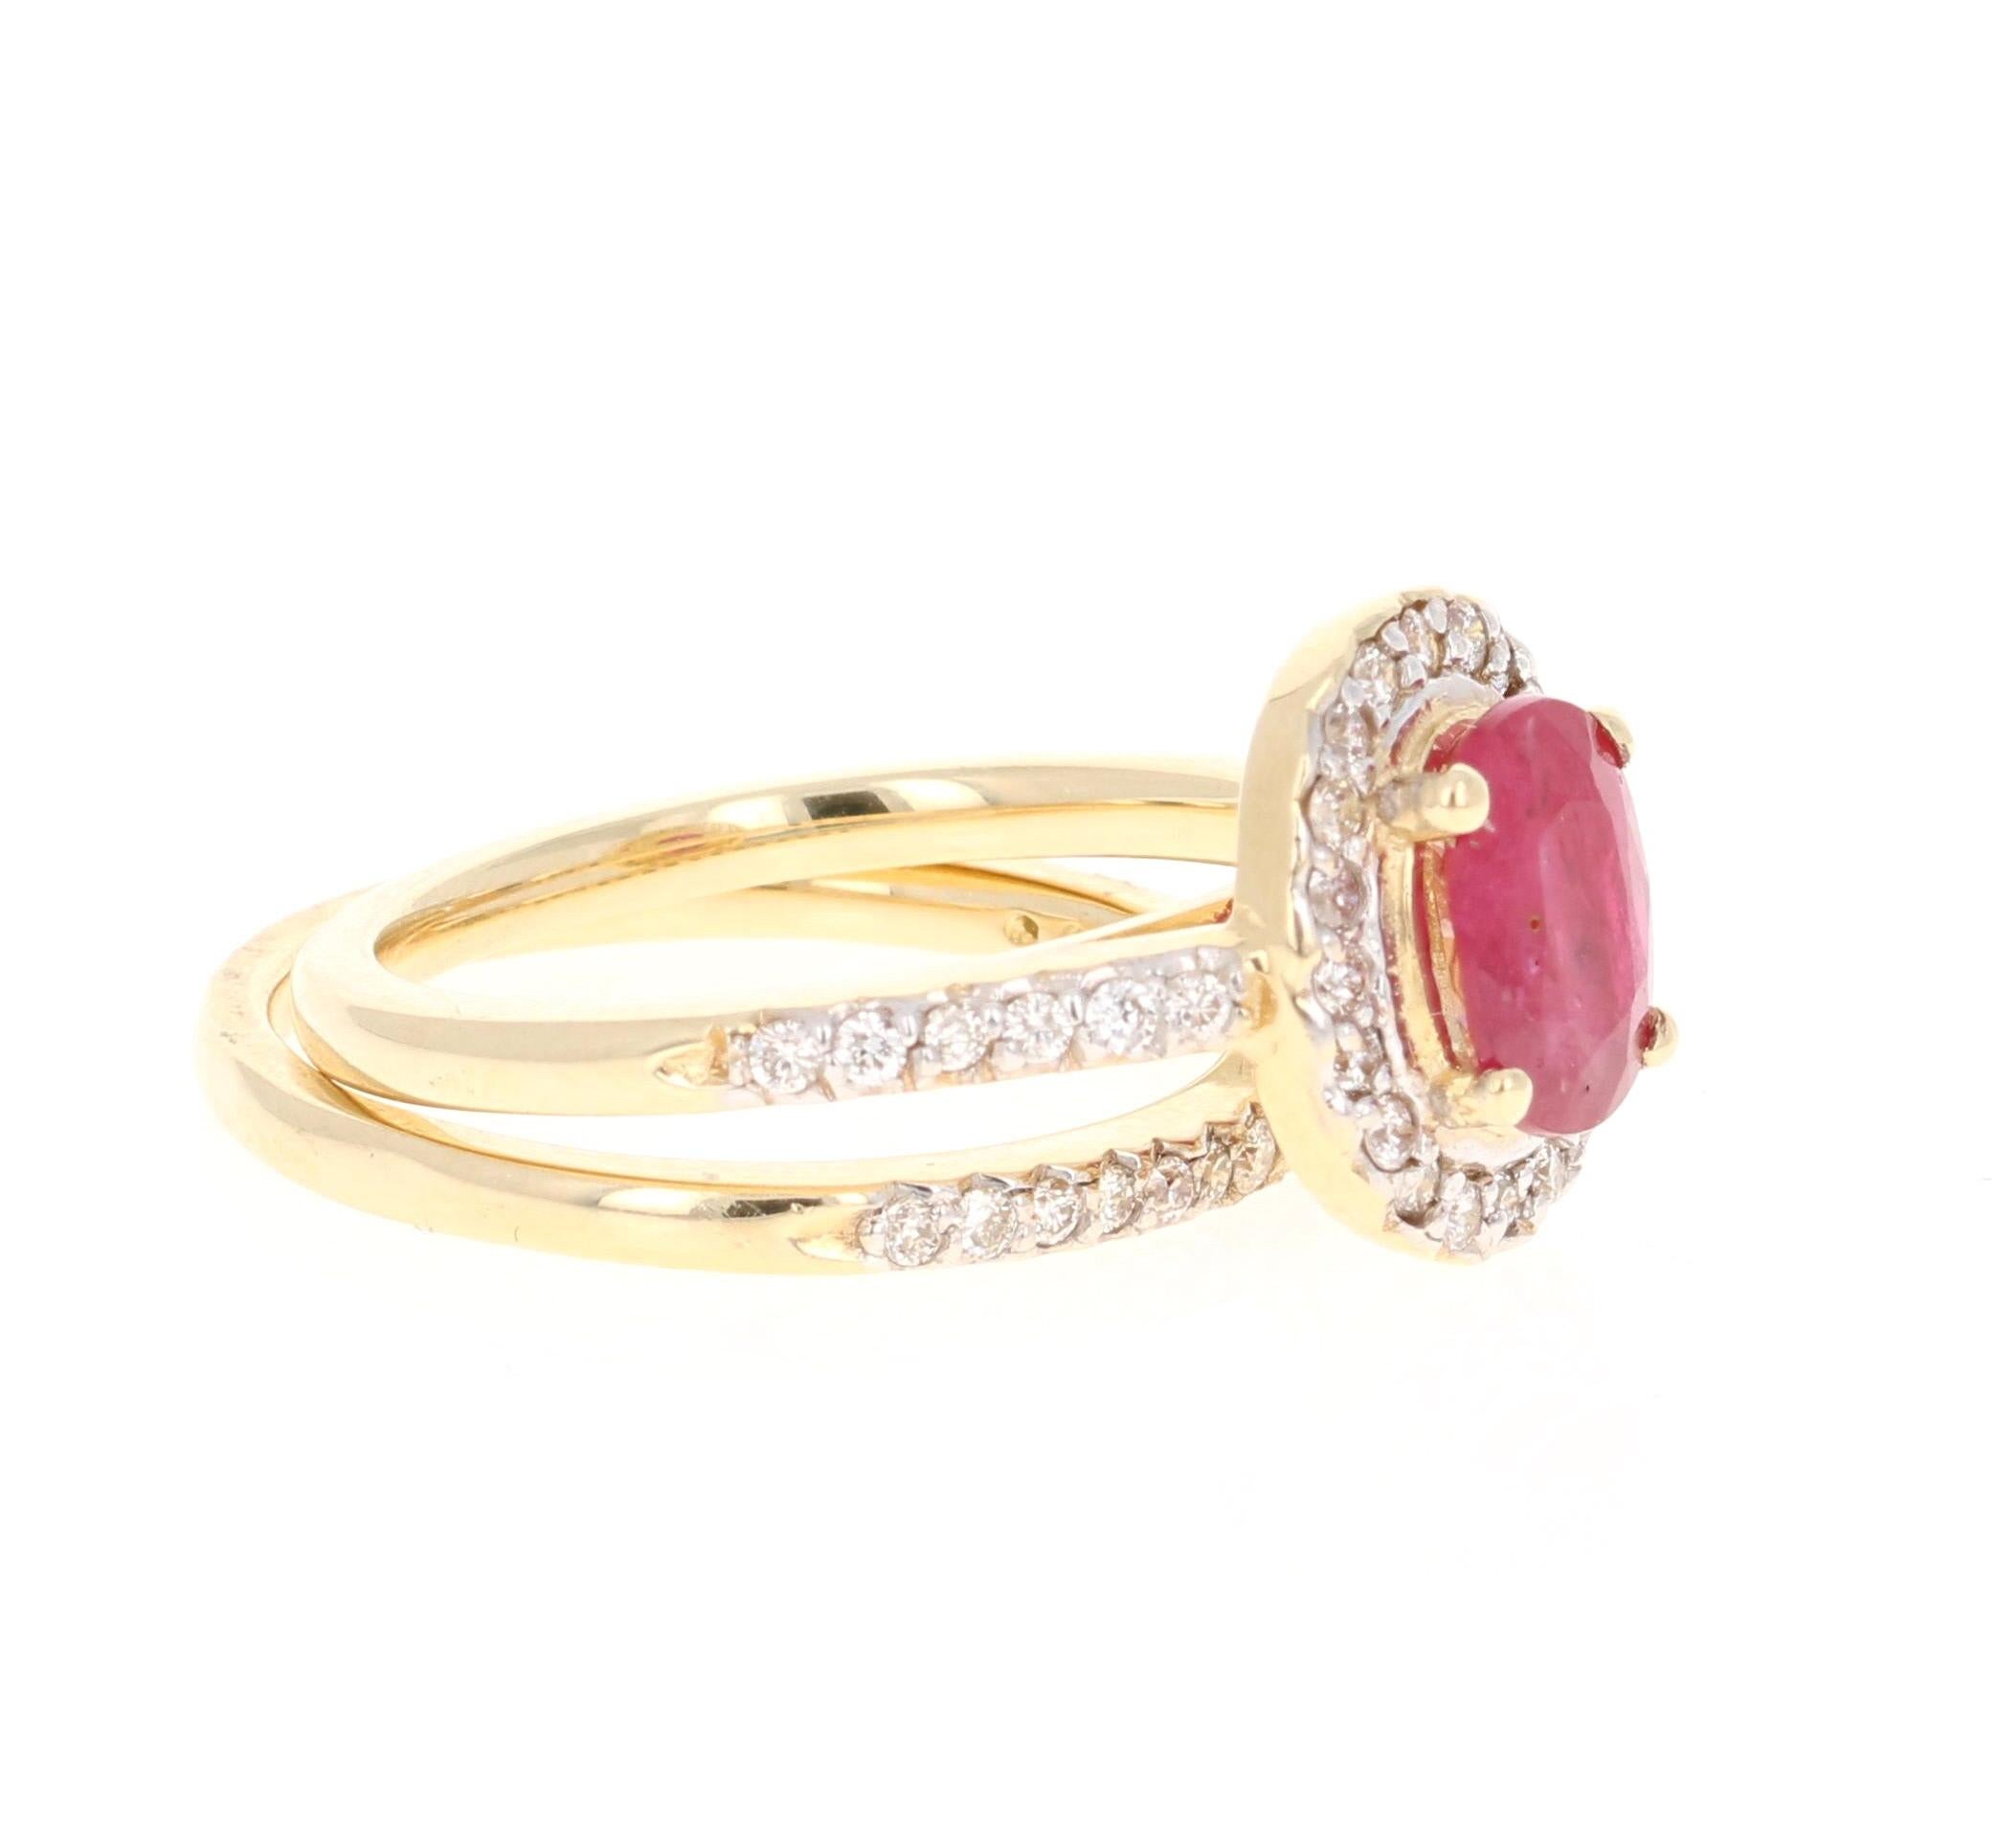 Simply beautiful Ruby Diamond Ring with a Oval Cut 1.33 Carat Ruby which is surrounded by 53 Round Cut Diamonds that weigh 0.50 carats. The total carat weight of the ring is 1.83 carats. 

The ring is casted in 14K Yellow Gold and weighs